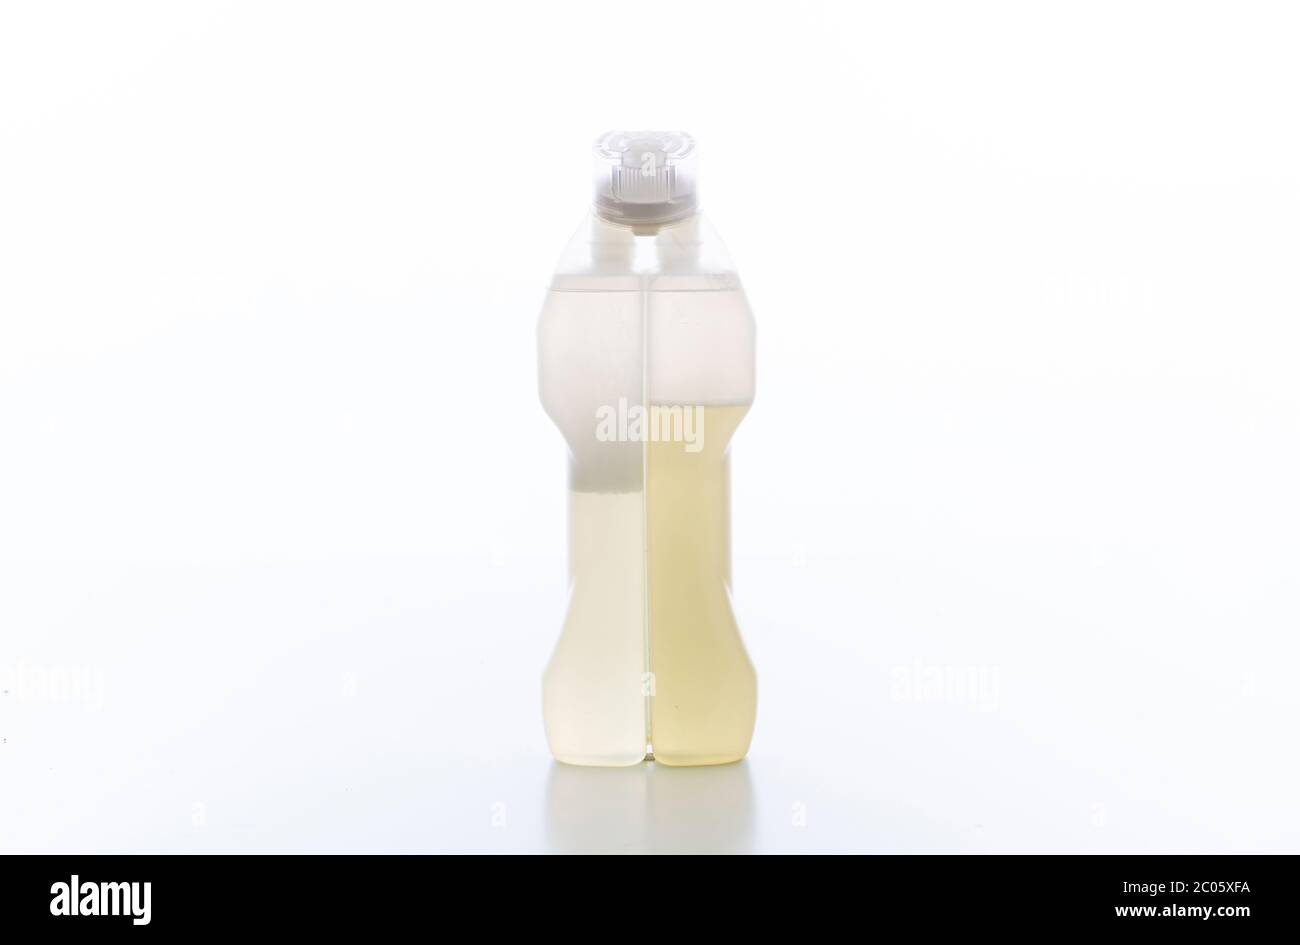 Cleaning carpet product isolated against white background. Chemical detergent clear bottle with two compartments, two components. Stock Photo